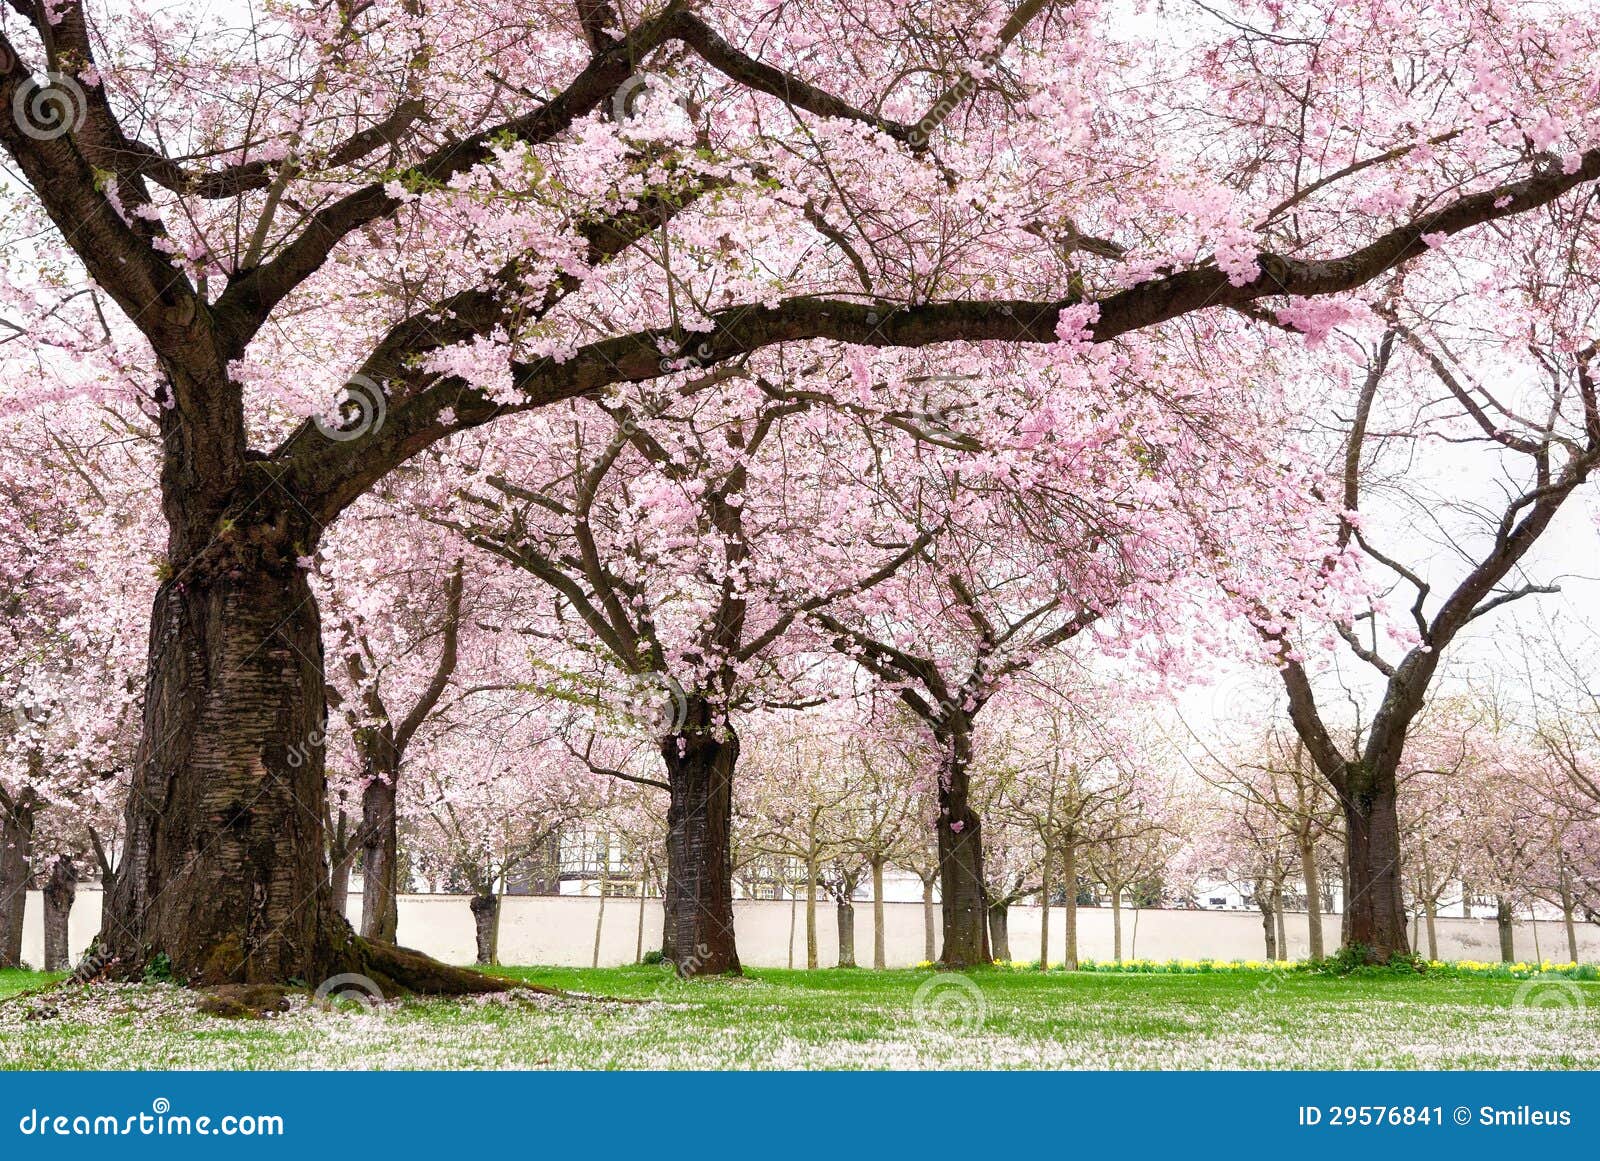 blossoming cherry trees with dreamy feel